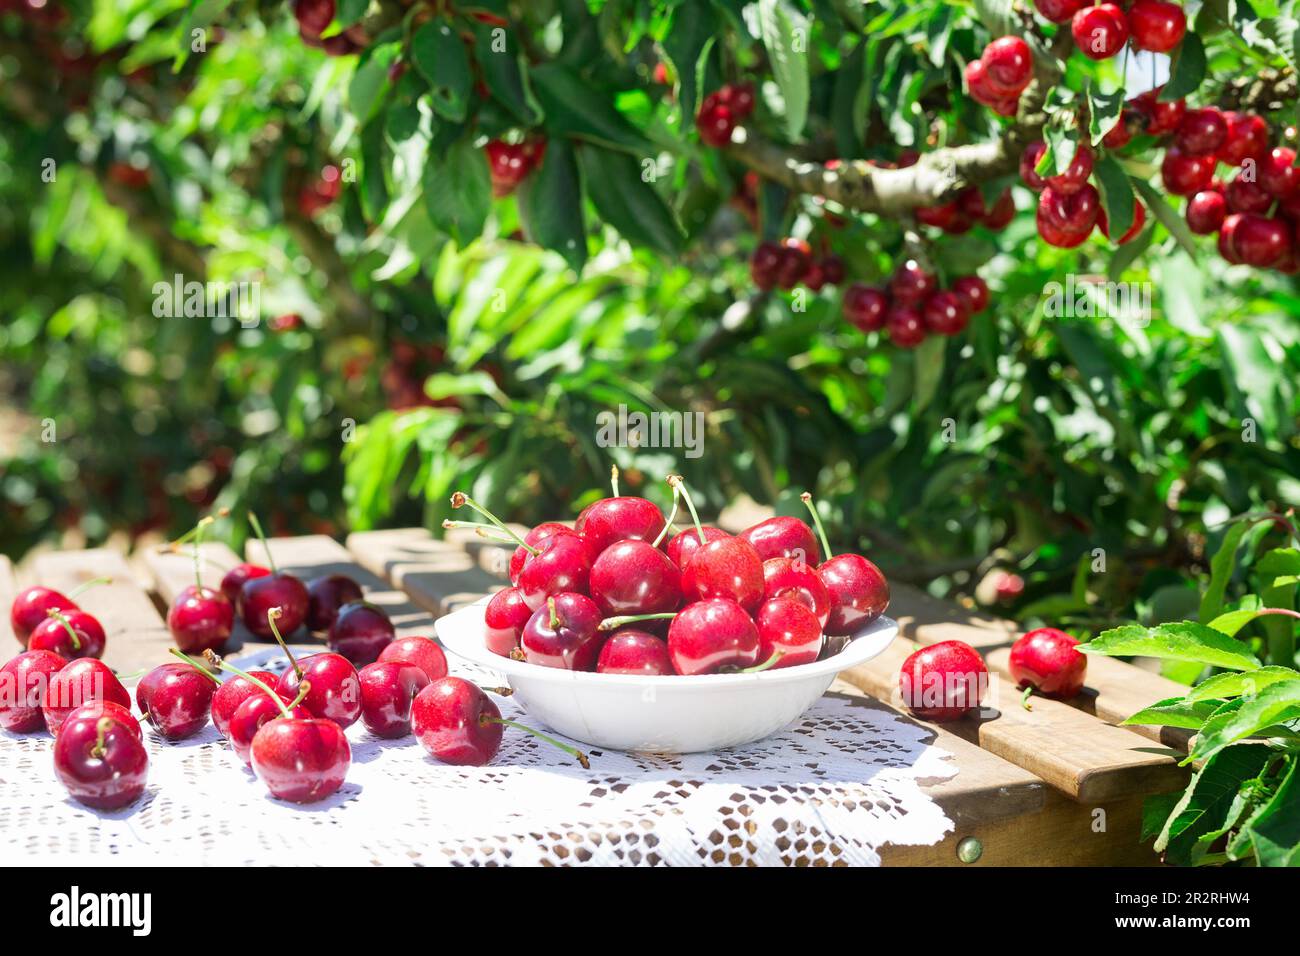 white vase filled with ripe cherries on the table Stock Photo